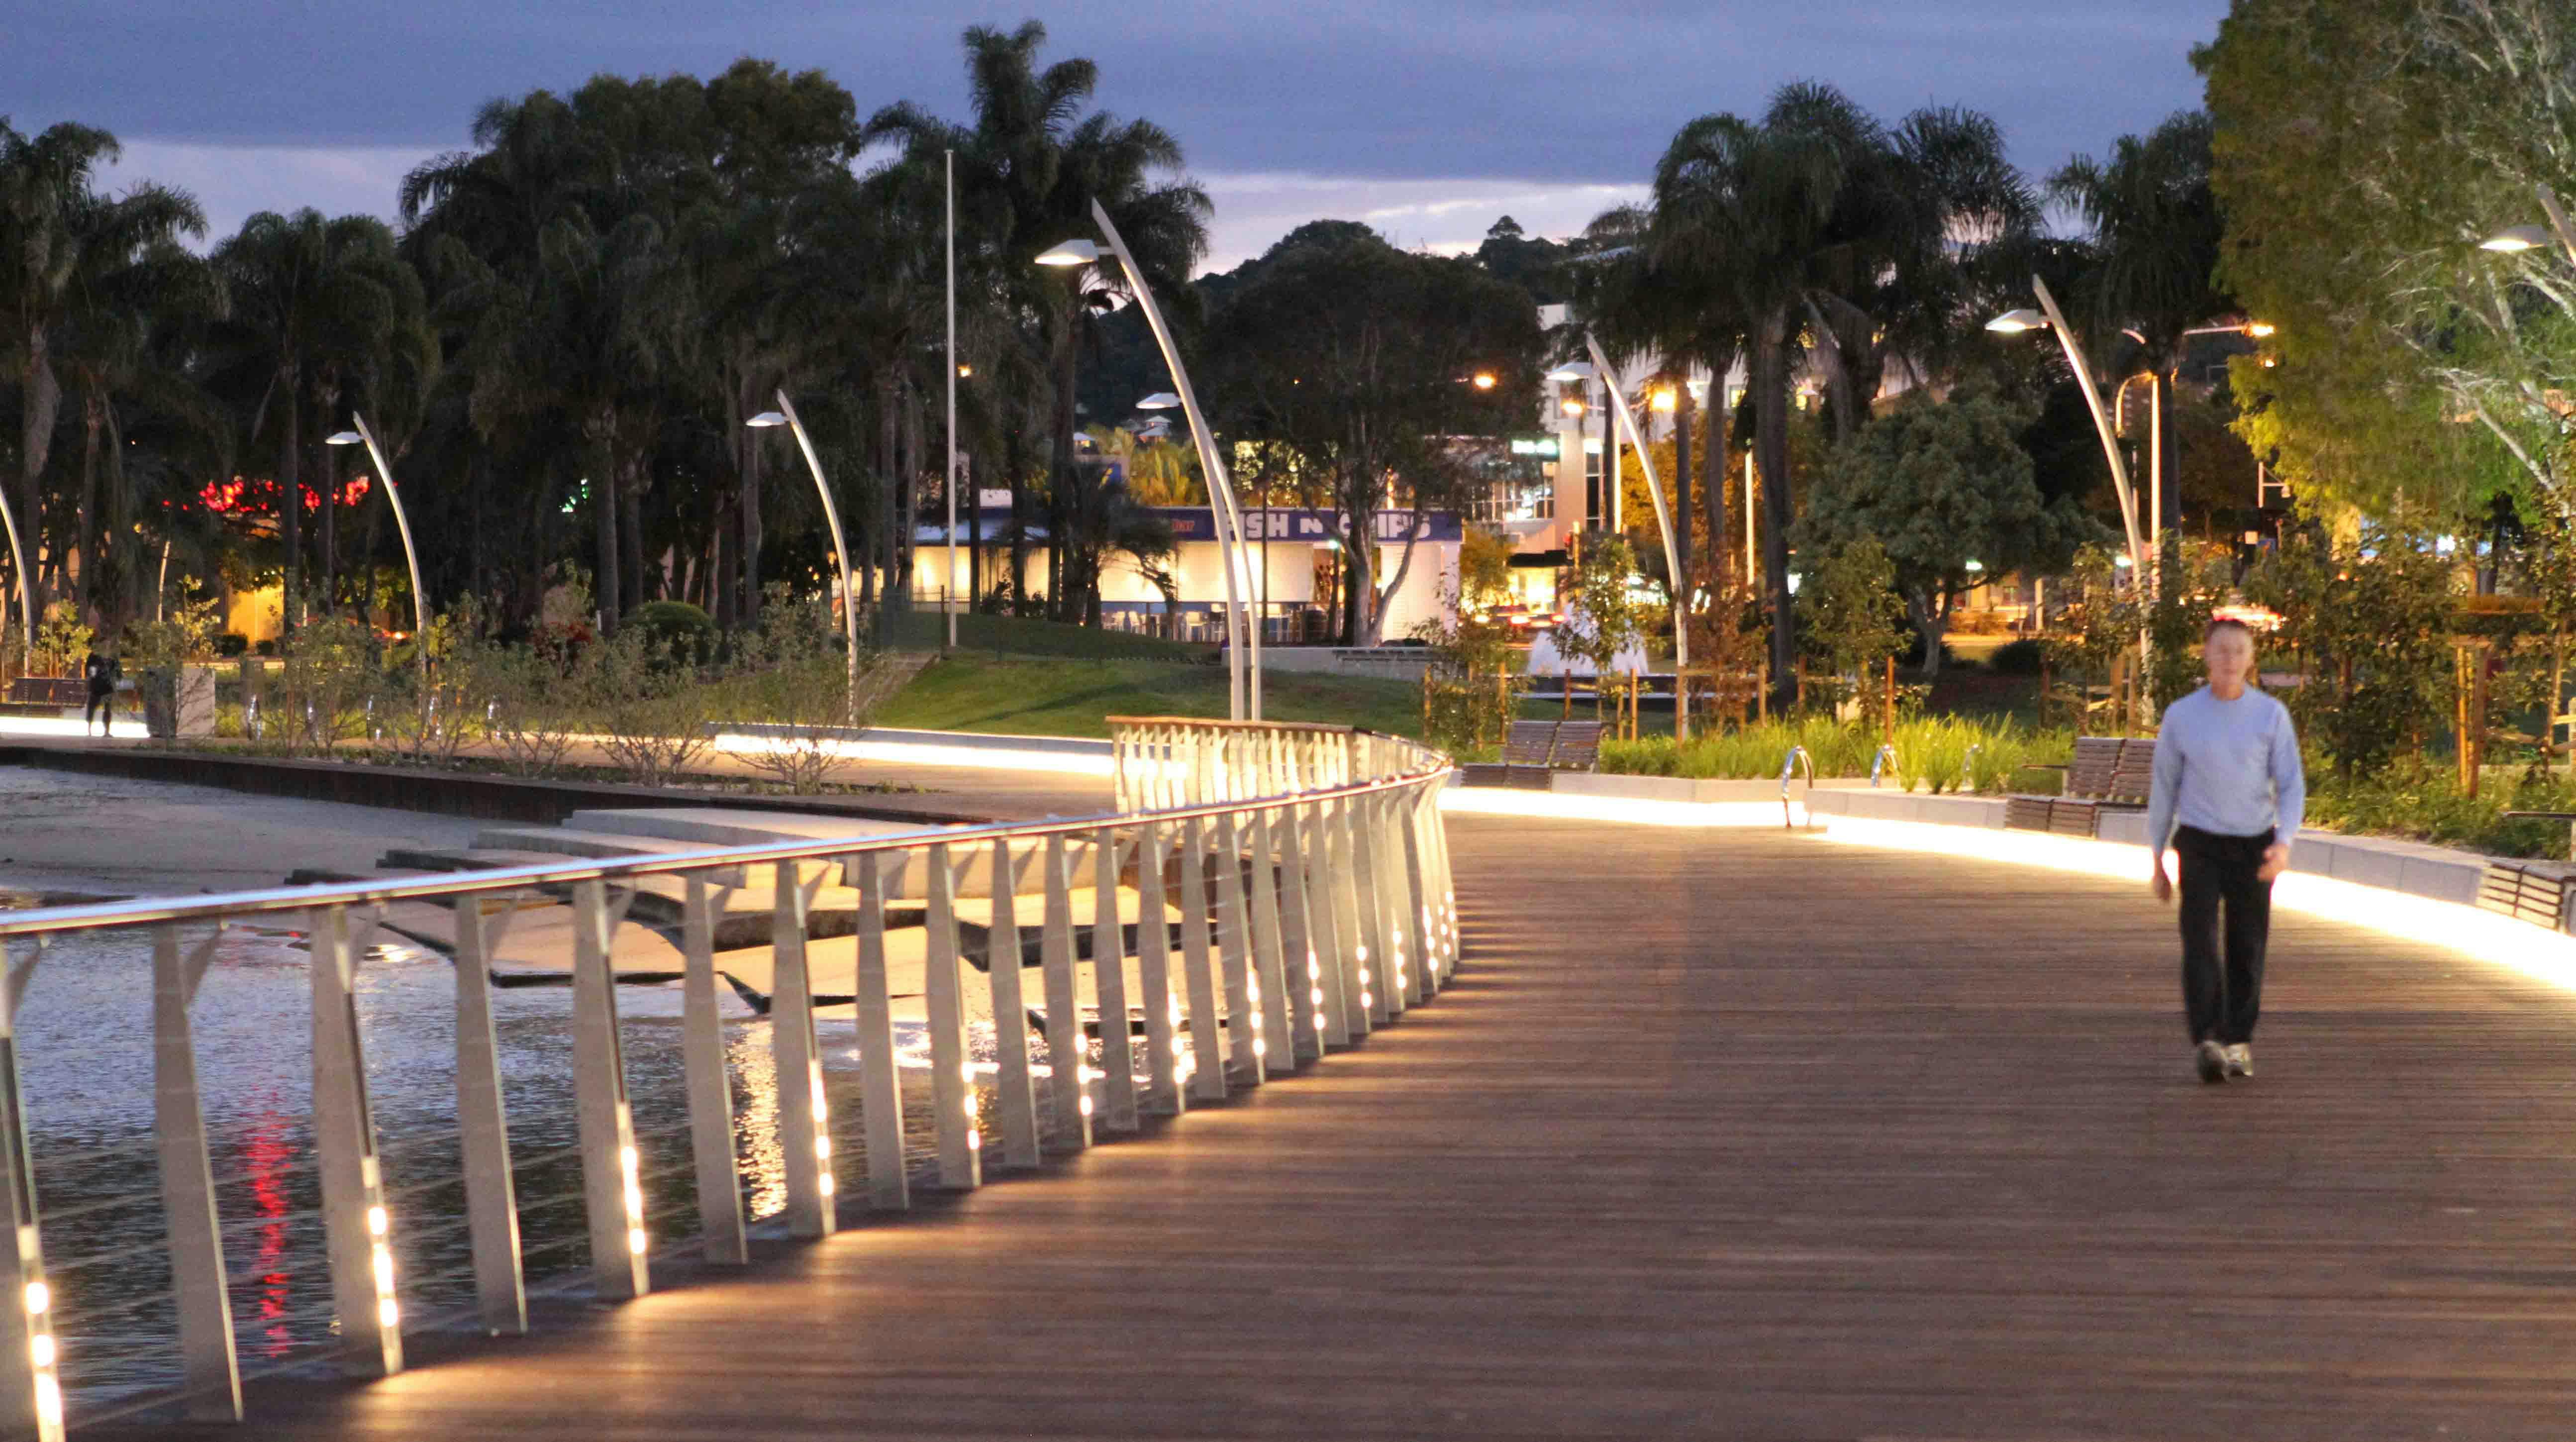 Locations like Jack Evans Boat Harbour are important for local culture in a number of ways, including providing a setting for activities.